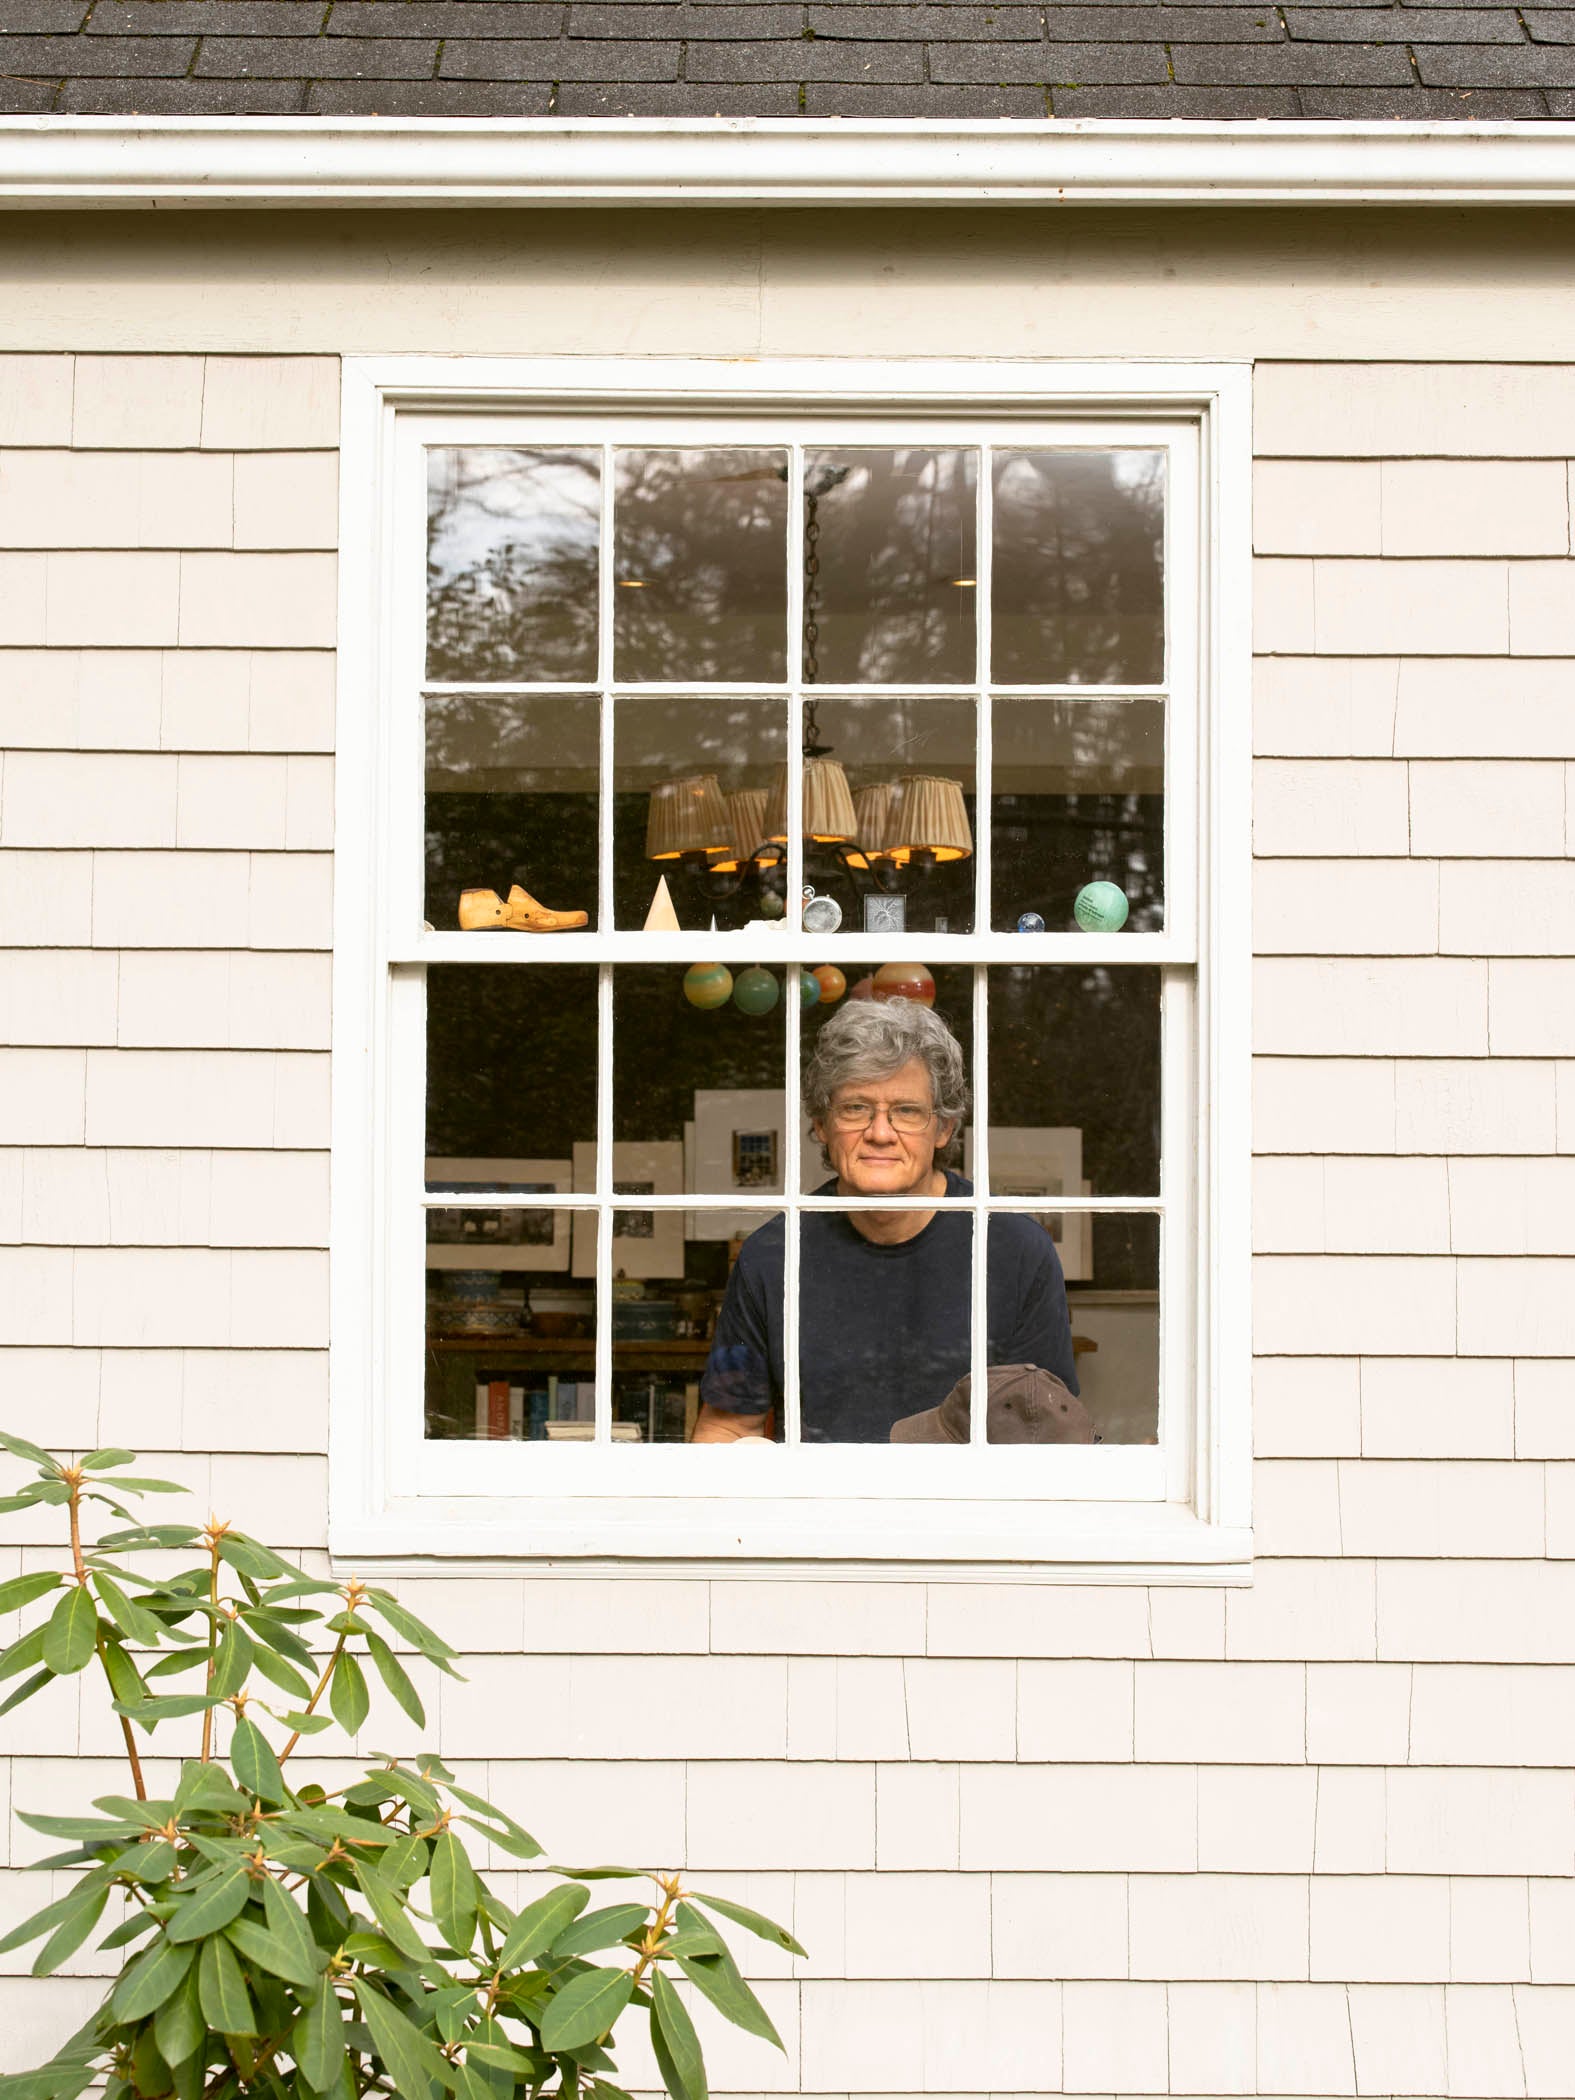 Photograph of the Artist at His Studio Window, 2020 image